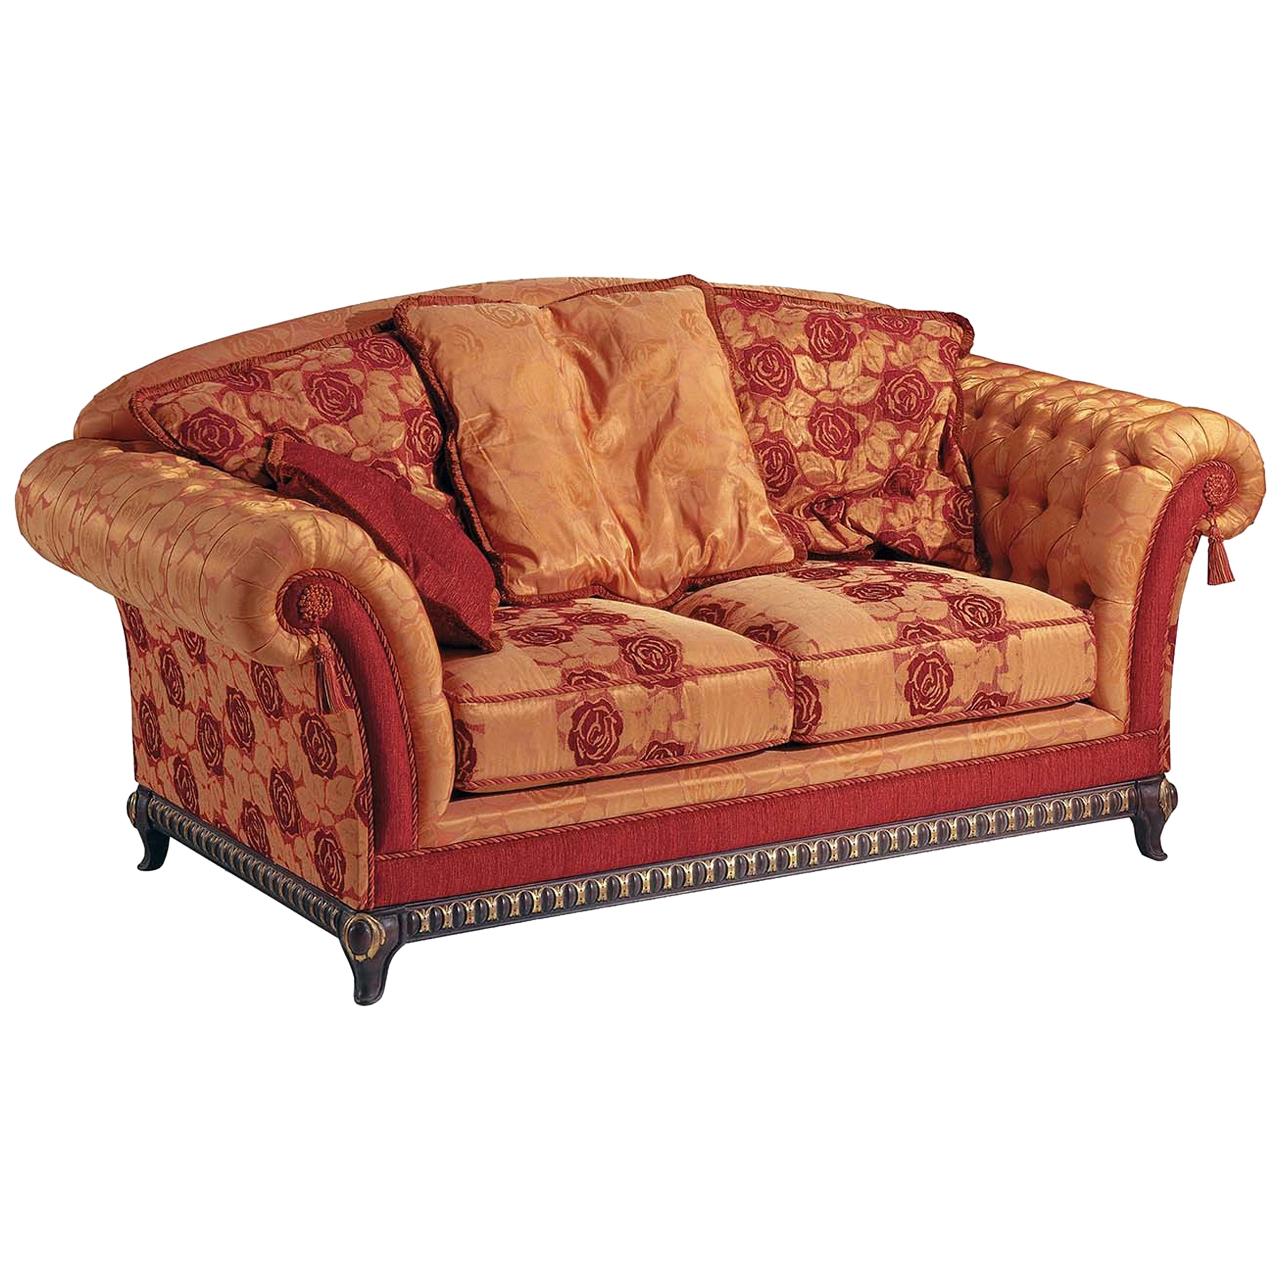 Red and Bronze Sofa